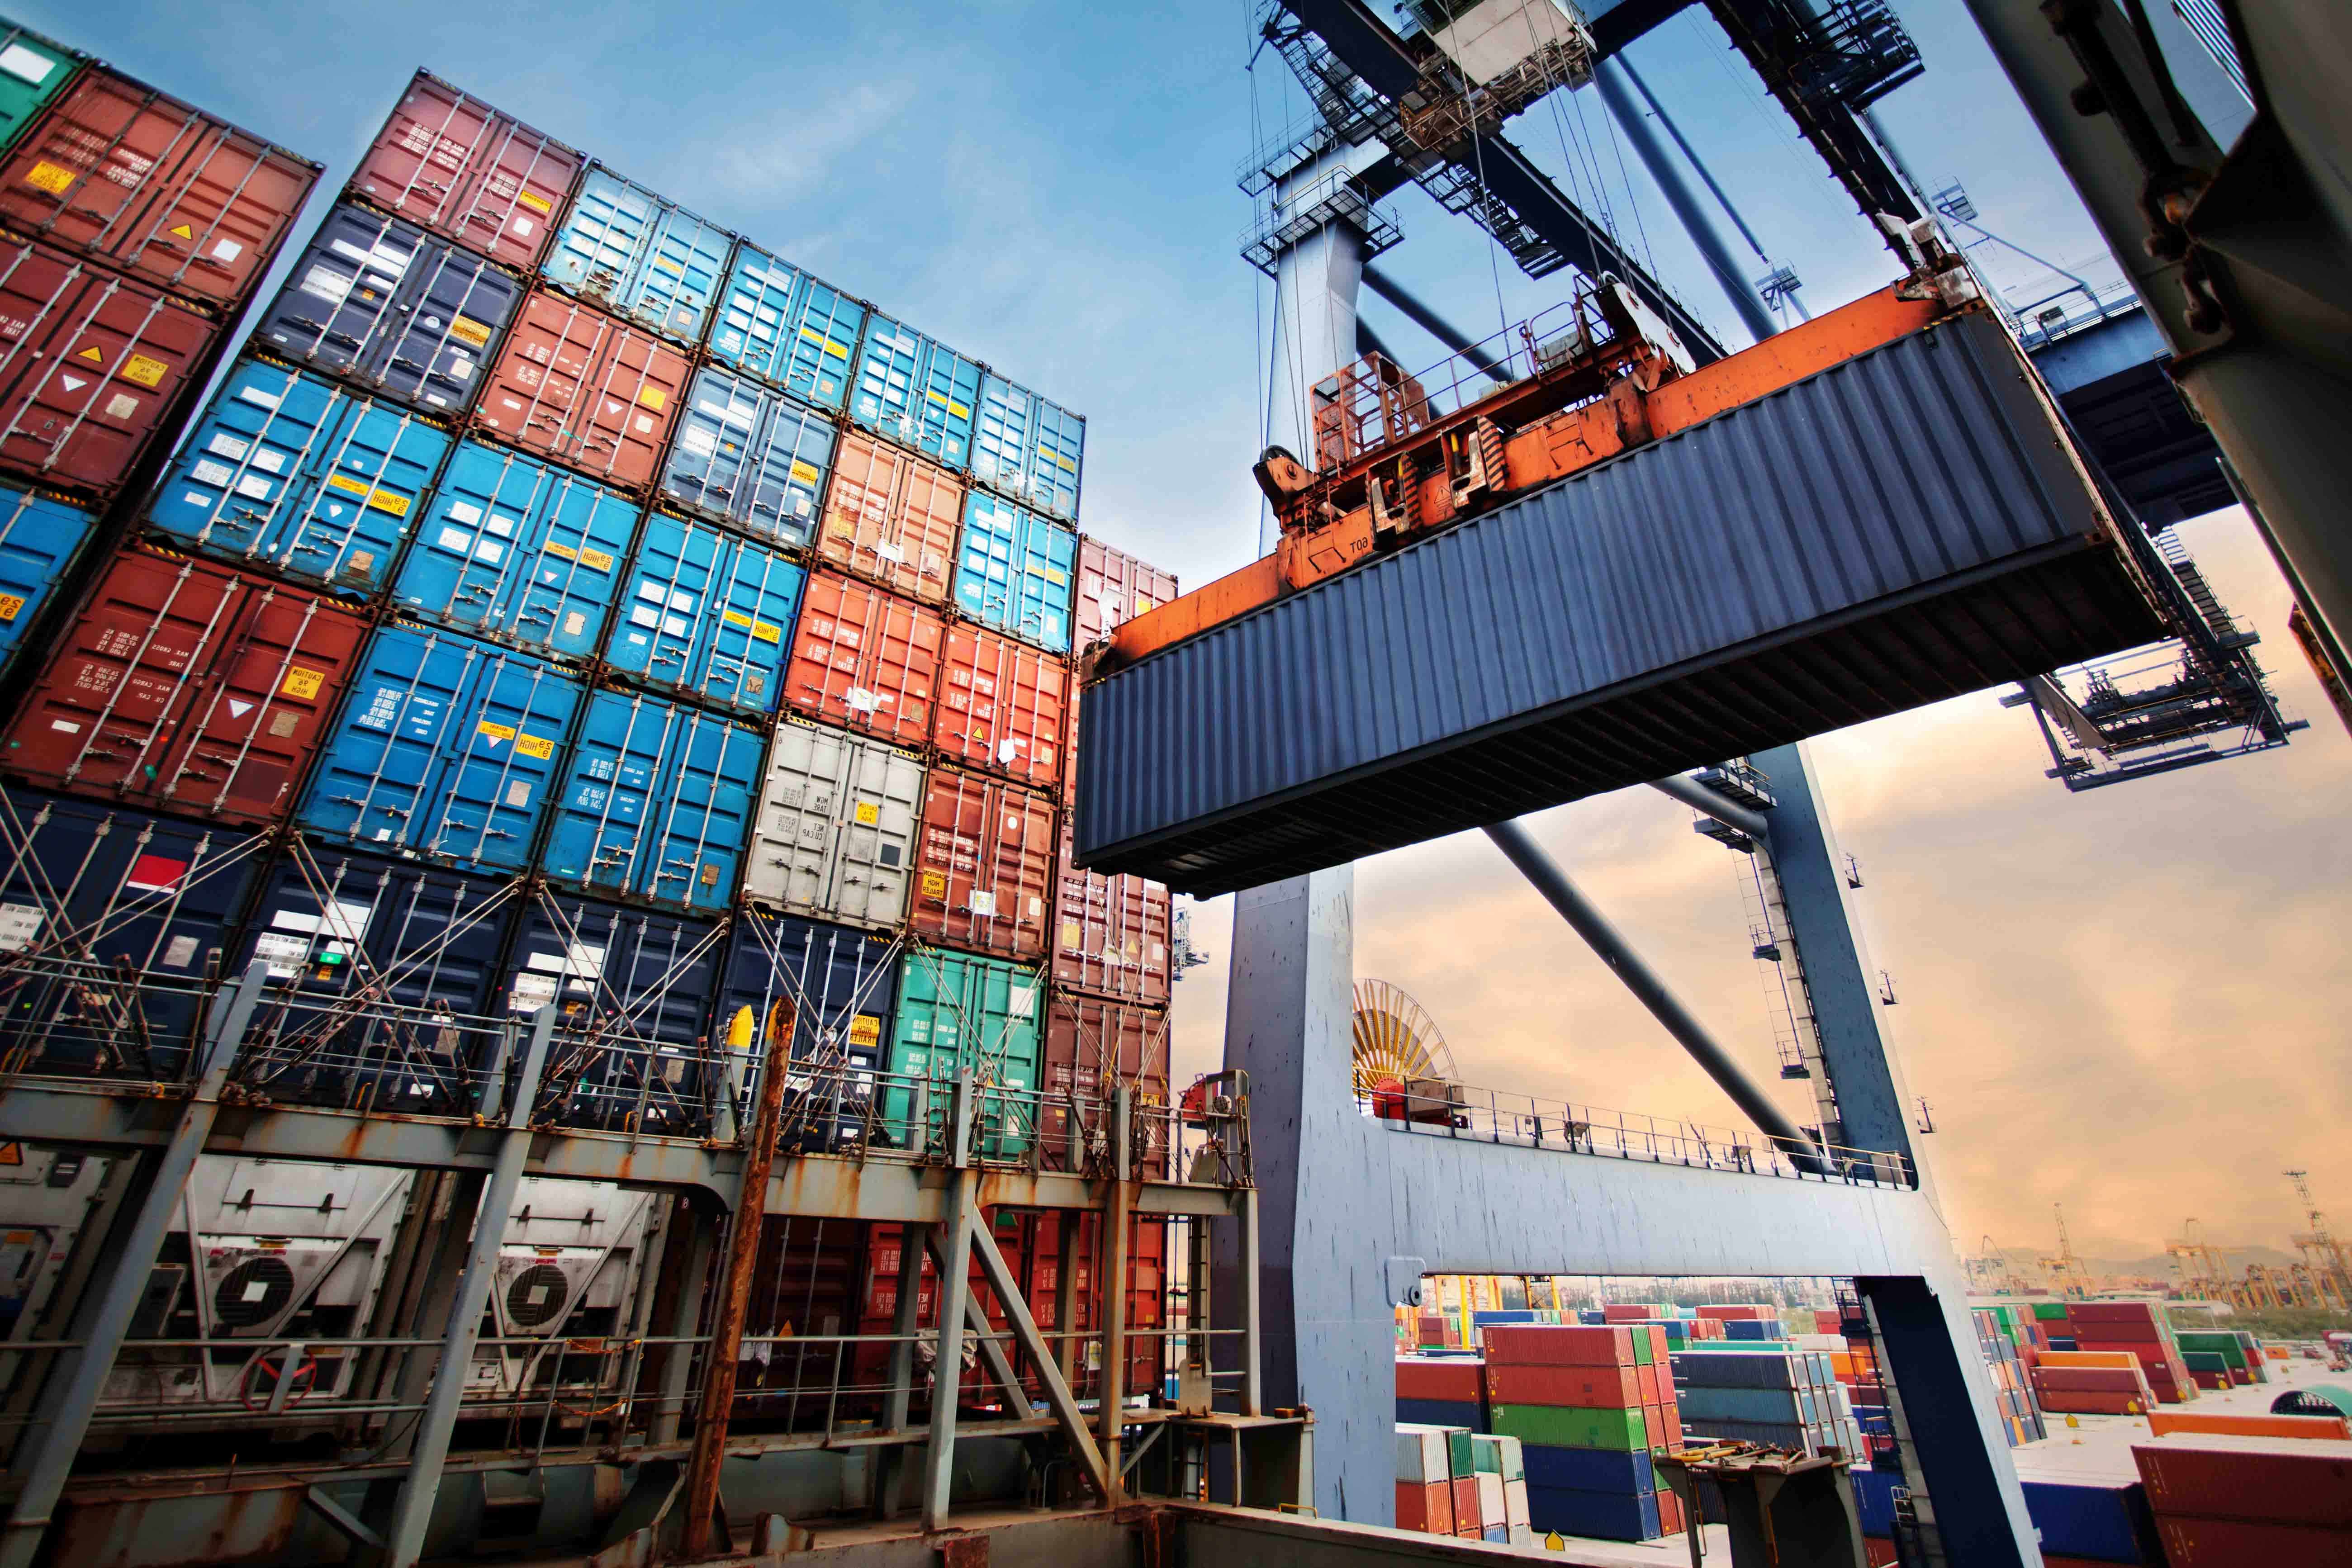 According to a World Bank estimate, Vietnam’s logistics costs currently account for 20.9 per cent of GDP, which by comparison is higher than China’s 19 per cent, Thailand’s 18 per cent, Japan’s 11 per cent and the EU’s 10 per cent.